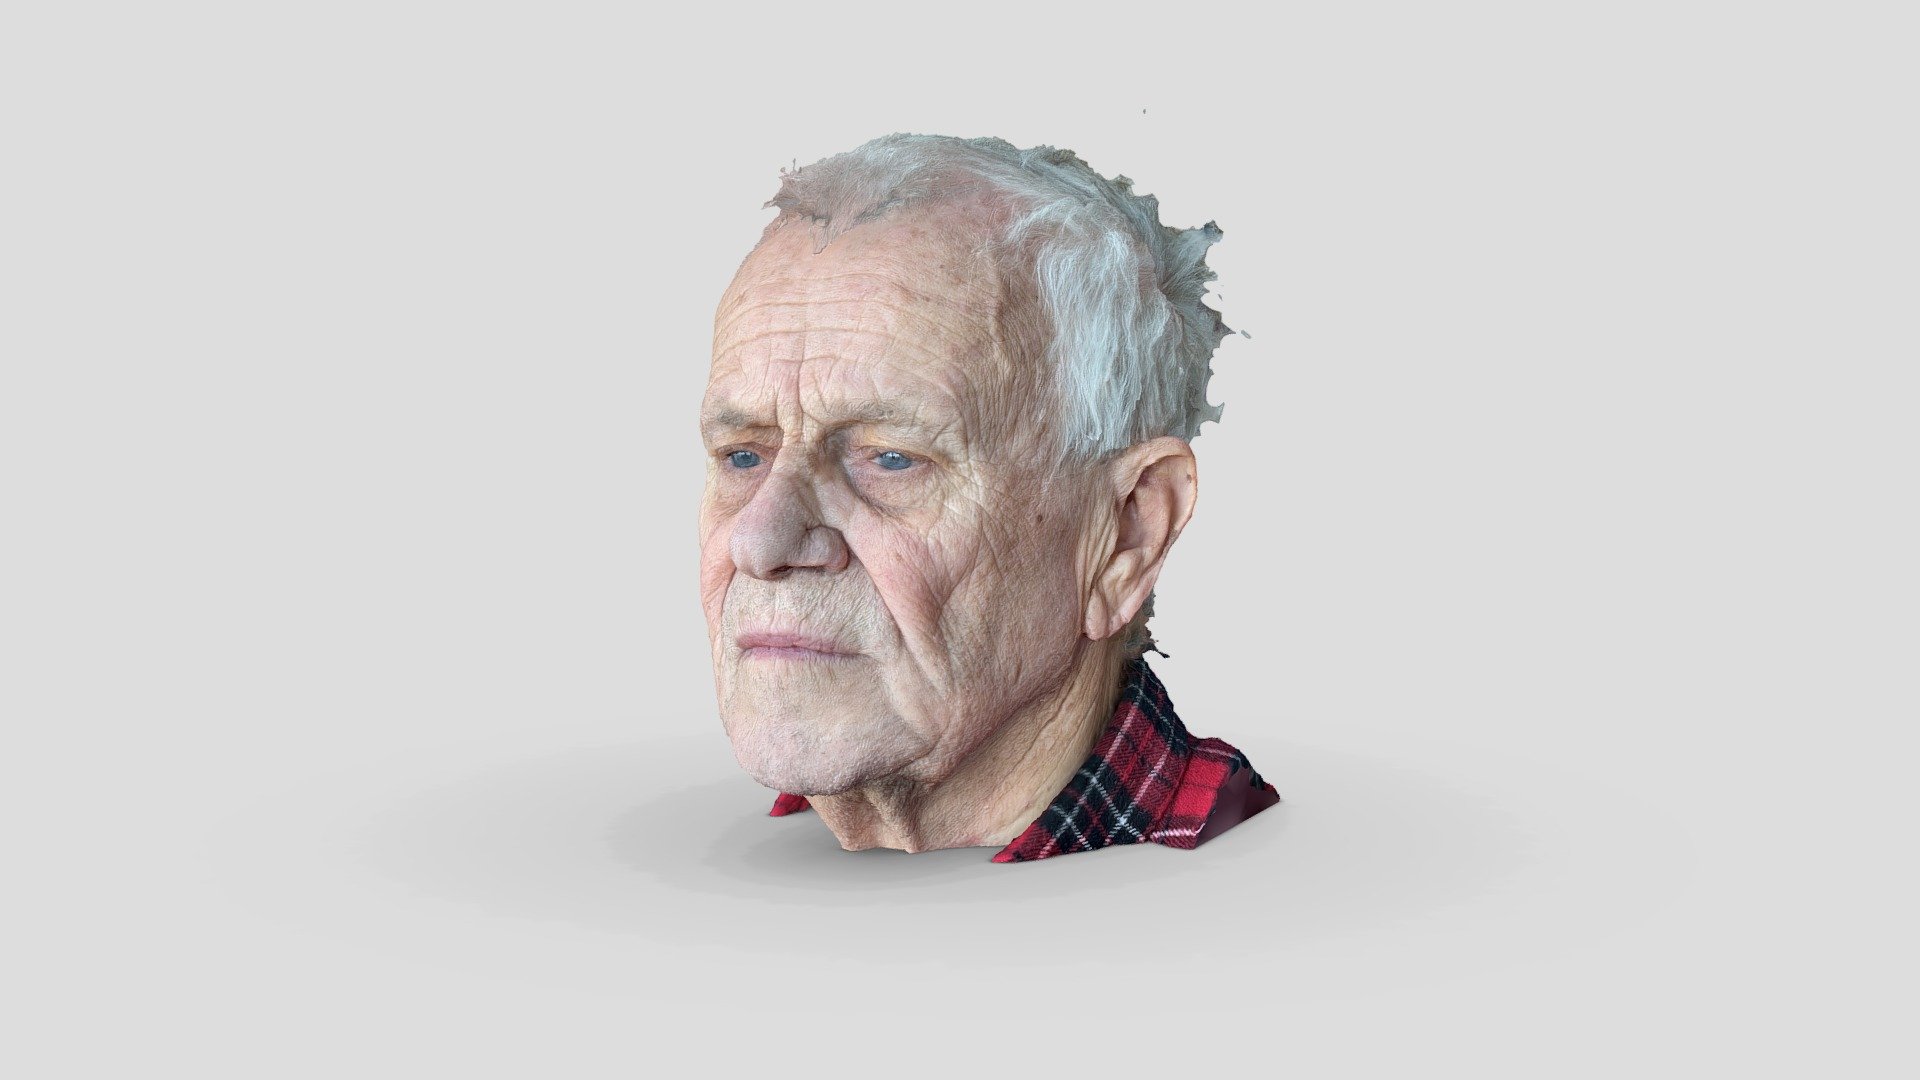 Scan of a human head.

Made with RealityScan (private beta version) 3d model